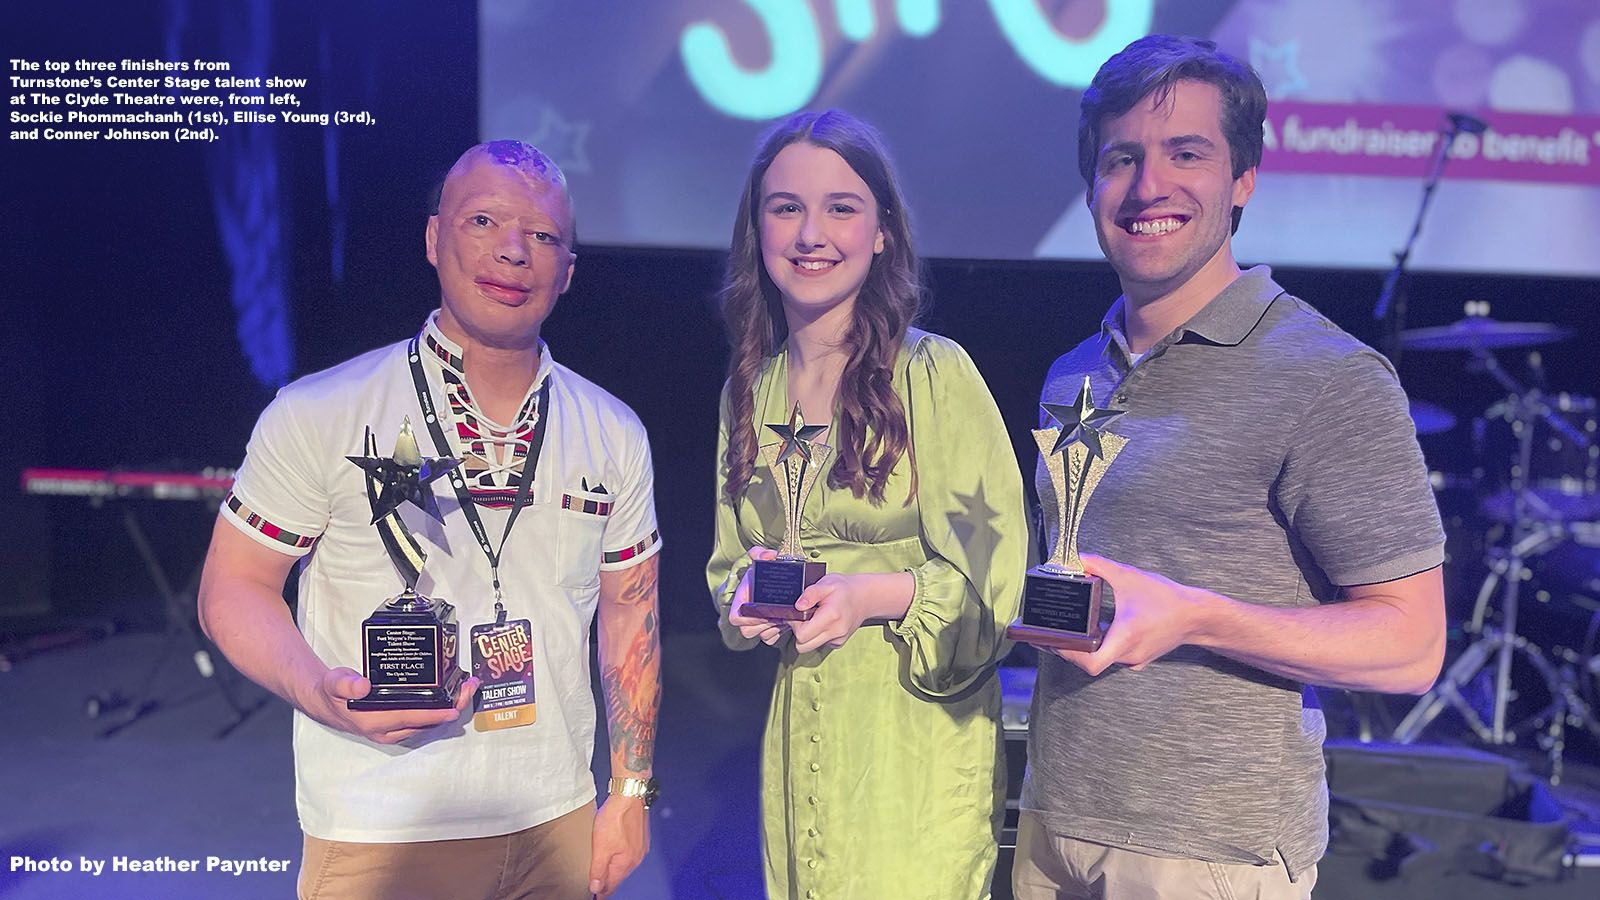 Sockie Phommachanh, left, won the second annual Center Stage talent show on May 9. Runner-up was Conner Johnson, right, and Ellise Young was third.